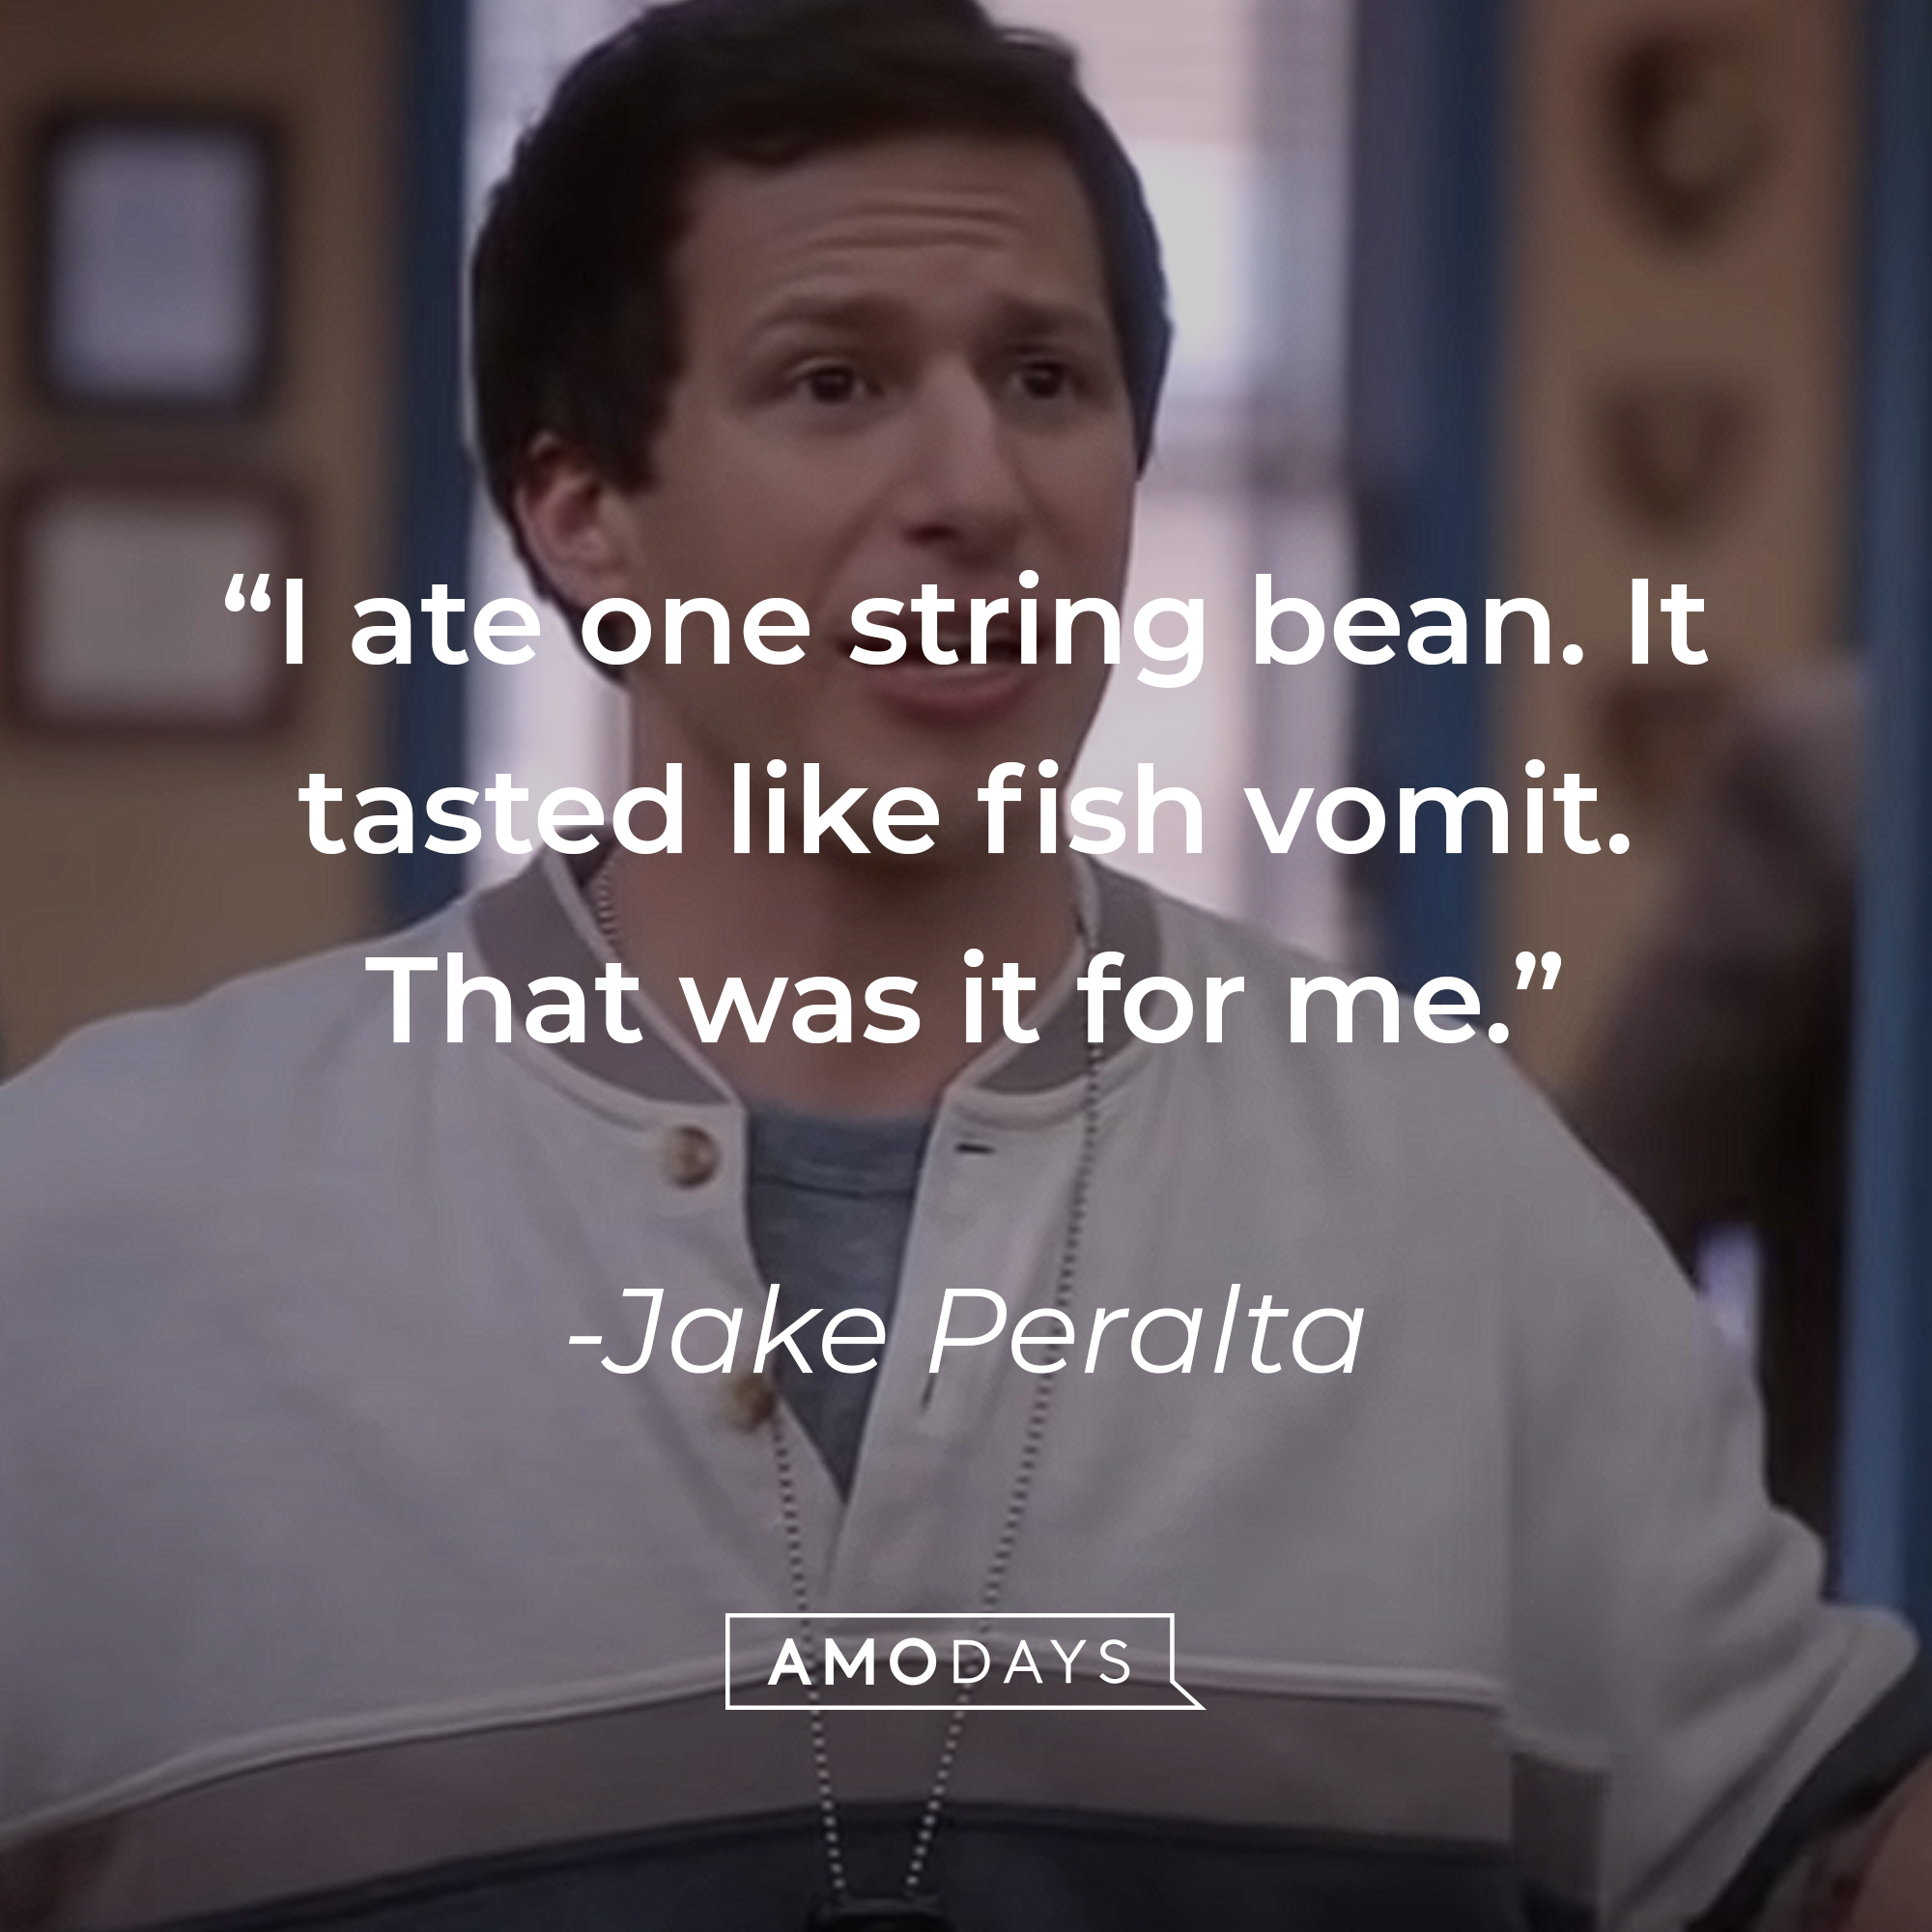 A picture of Jake Peralta with his quote: "I ate one string bean. It tasted like fish vomit. That was it for me." | Source: youtube.com/NBCBrooklyn99